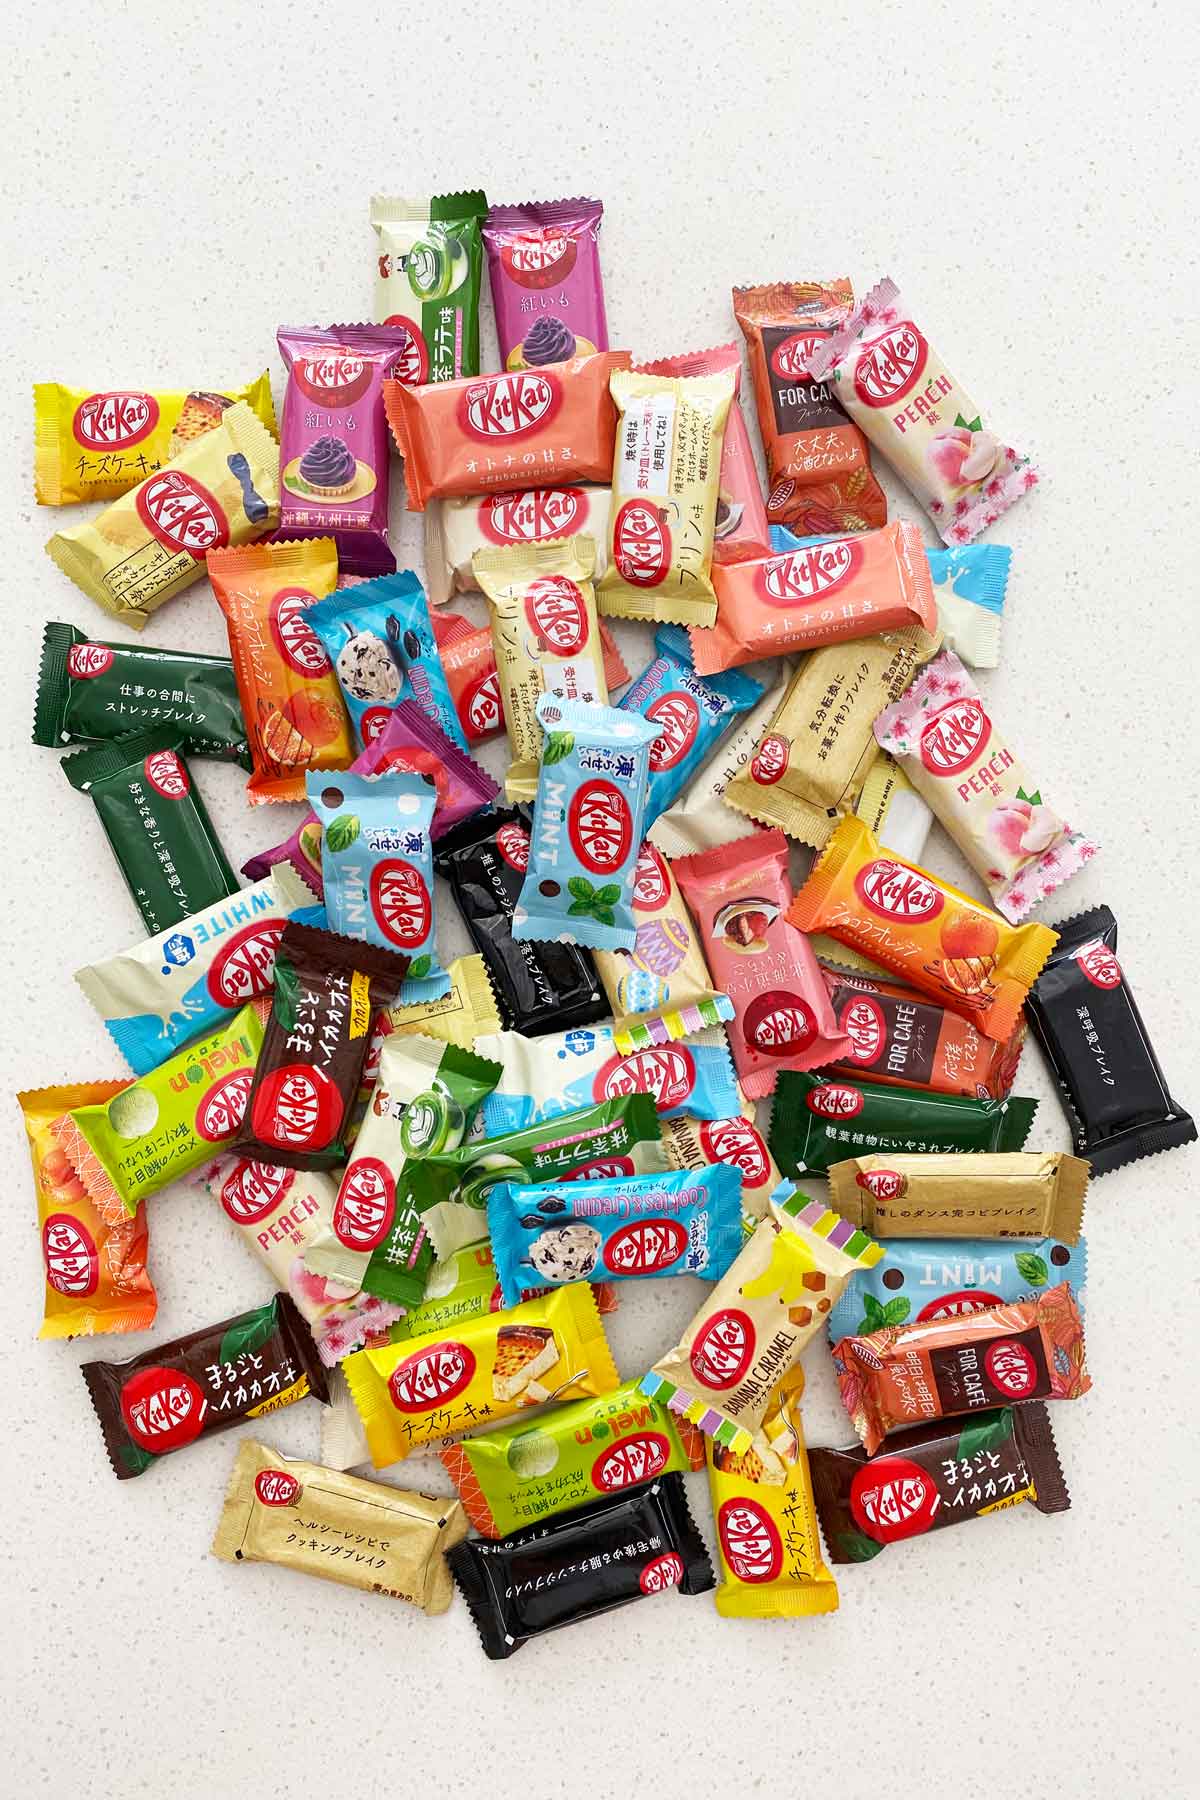 Popular flavours of KitKats and where to find them